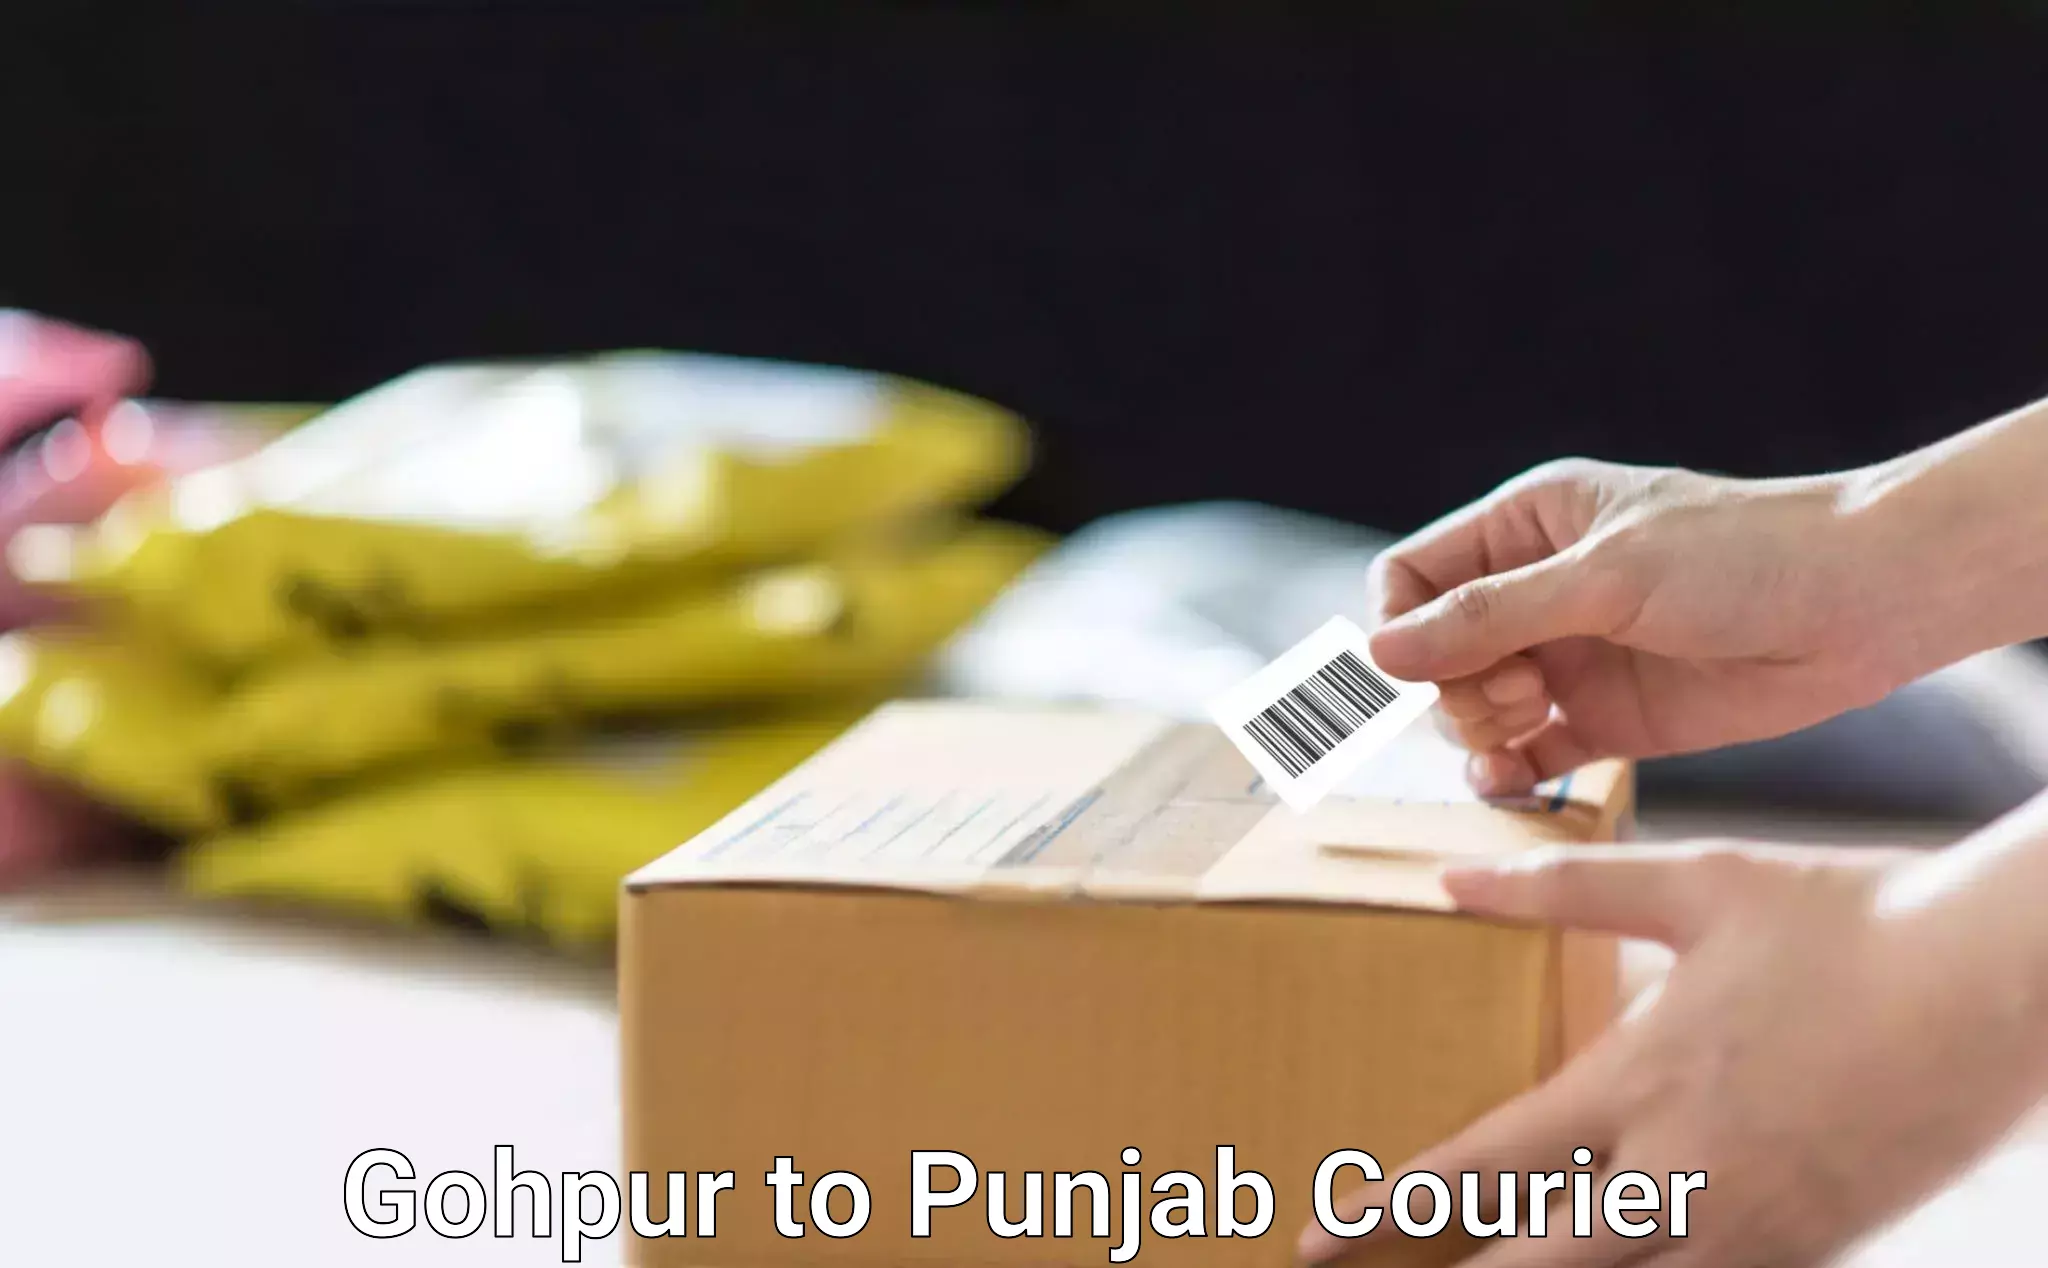 Residential courier service Gohpur to Dhuri